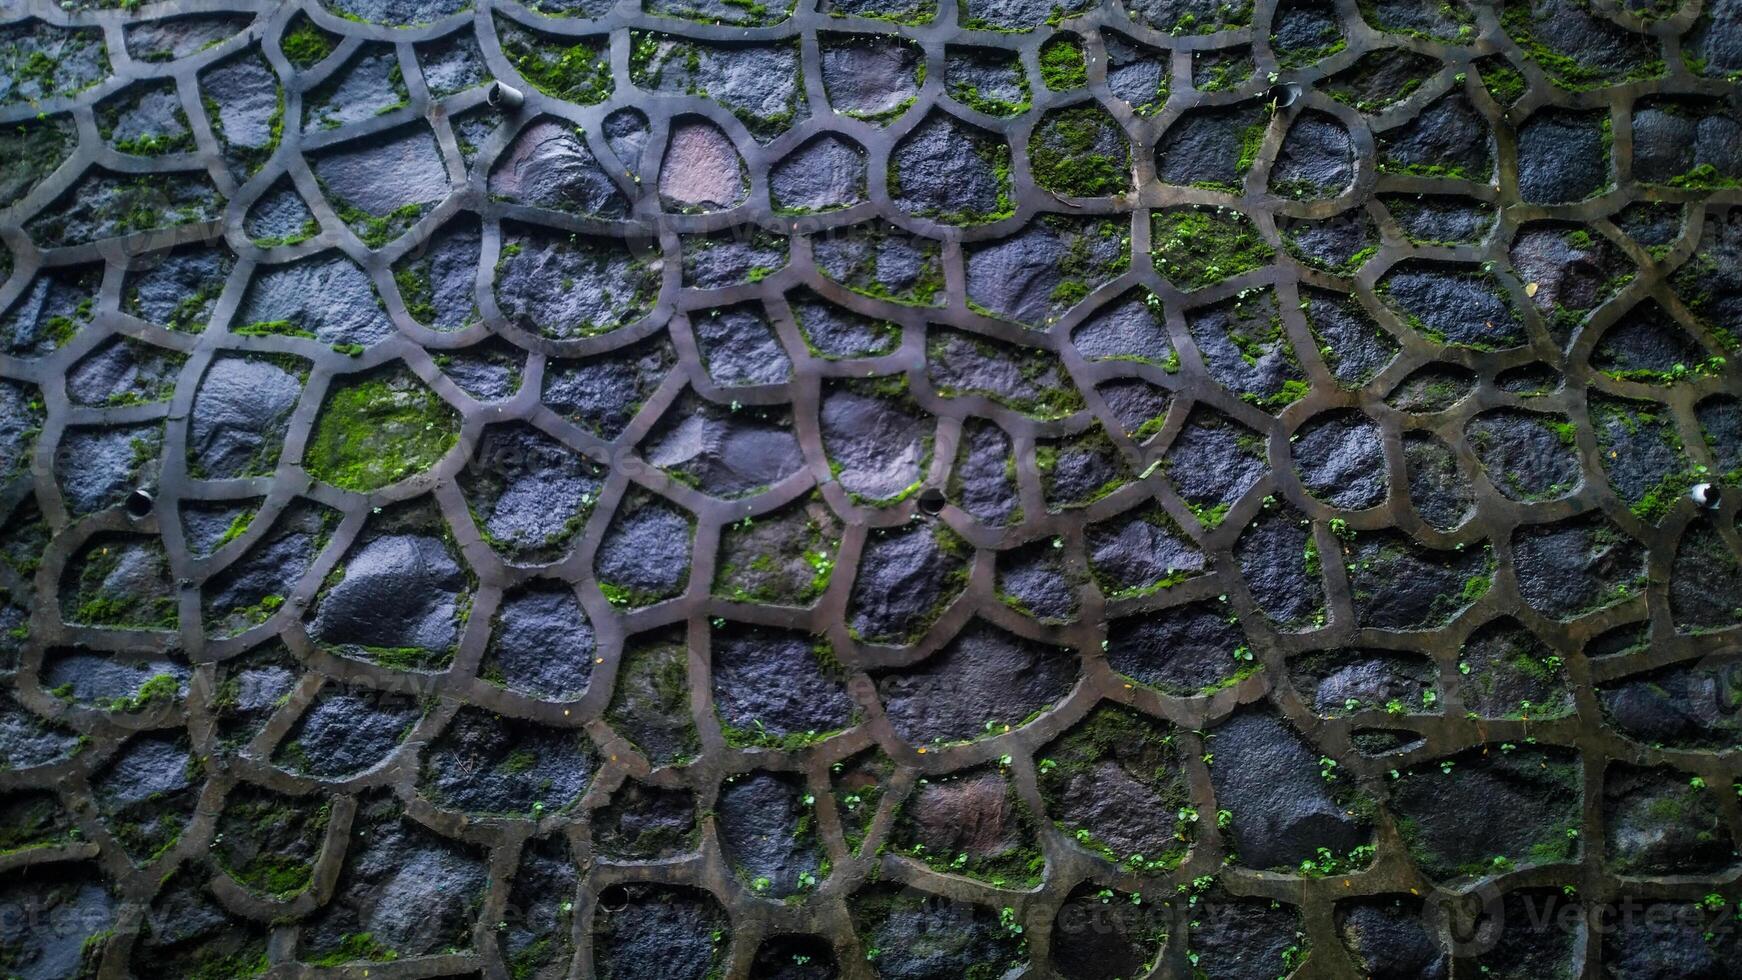 Texture of a stone wall. wet stone wall with moss growing on stone photo